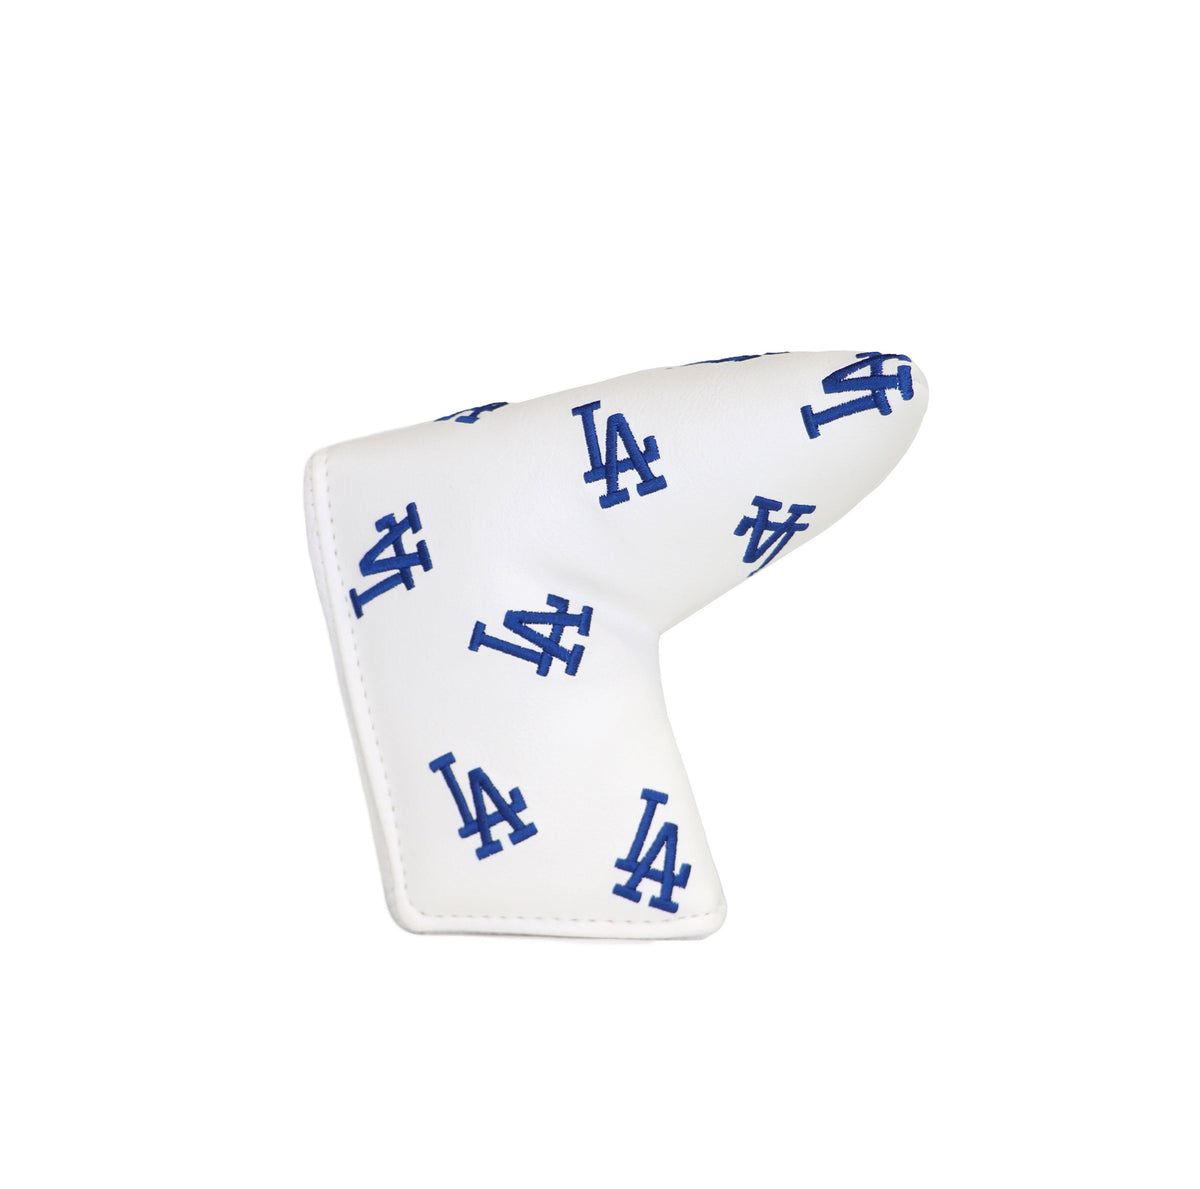 Los Angeles Dodgers Head Rest Cover